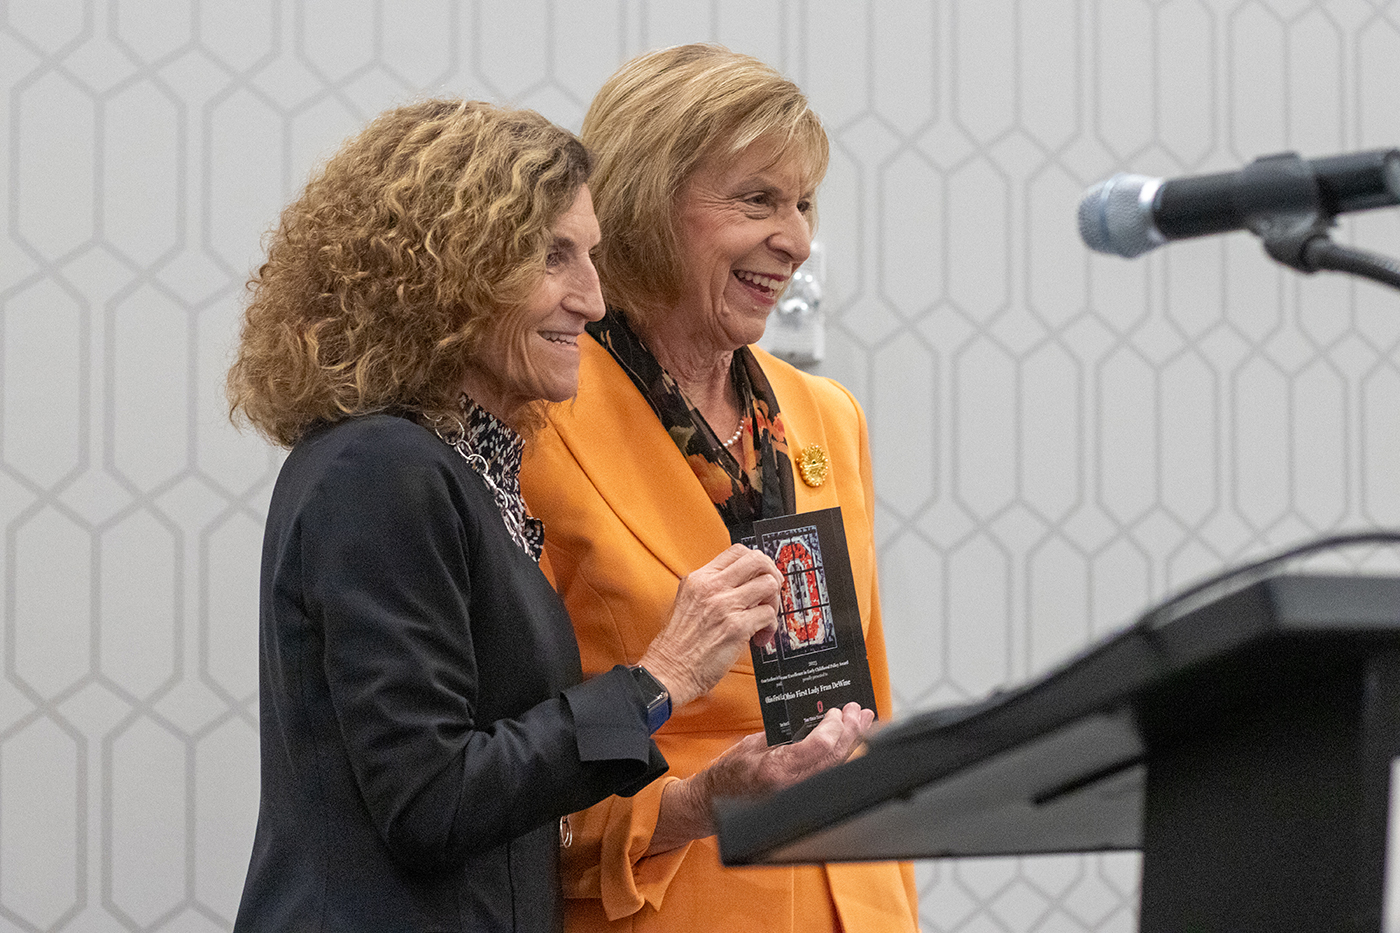 Tanny Crane, president and CEO of Crane Group, left, stands next to Ohio First Lady Fran DeWine, while both women hold a plaque that Crane presented to DeWine as the recipient of a Crane Excellence in Early Childhood Award.